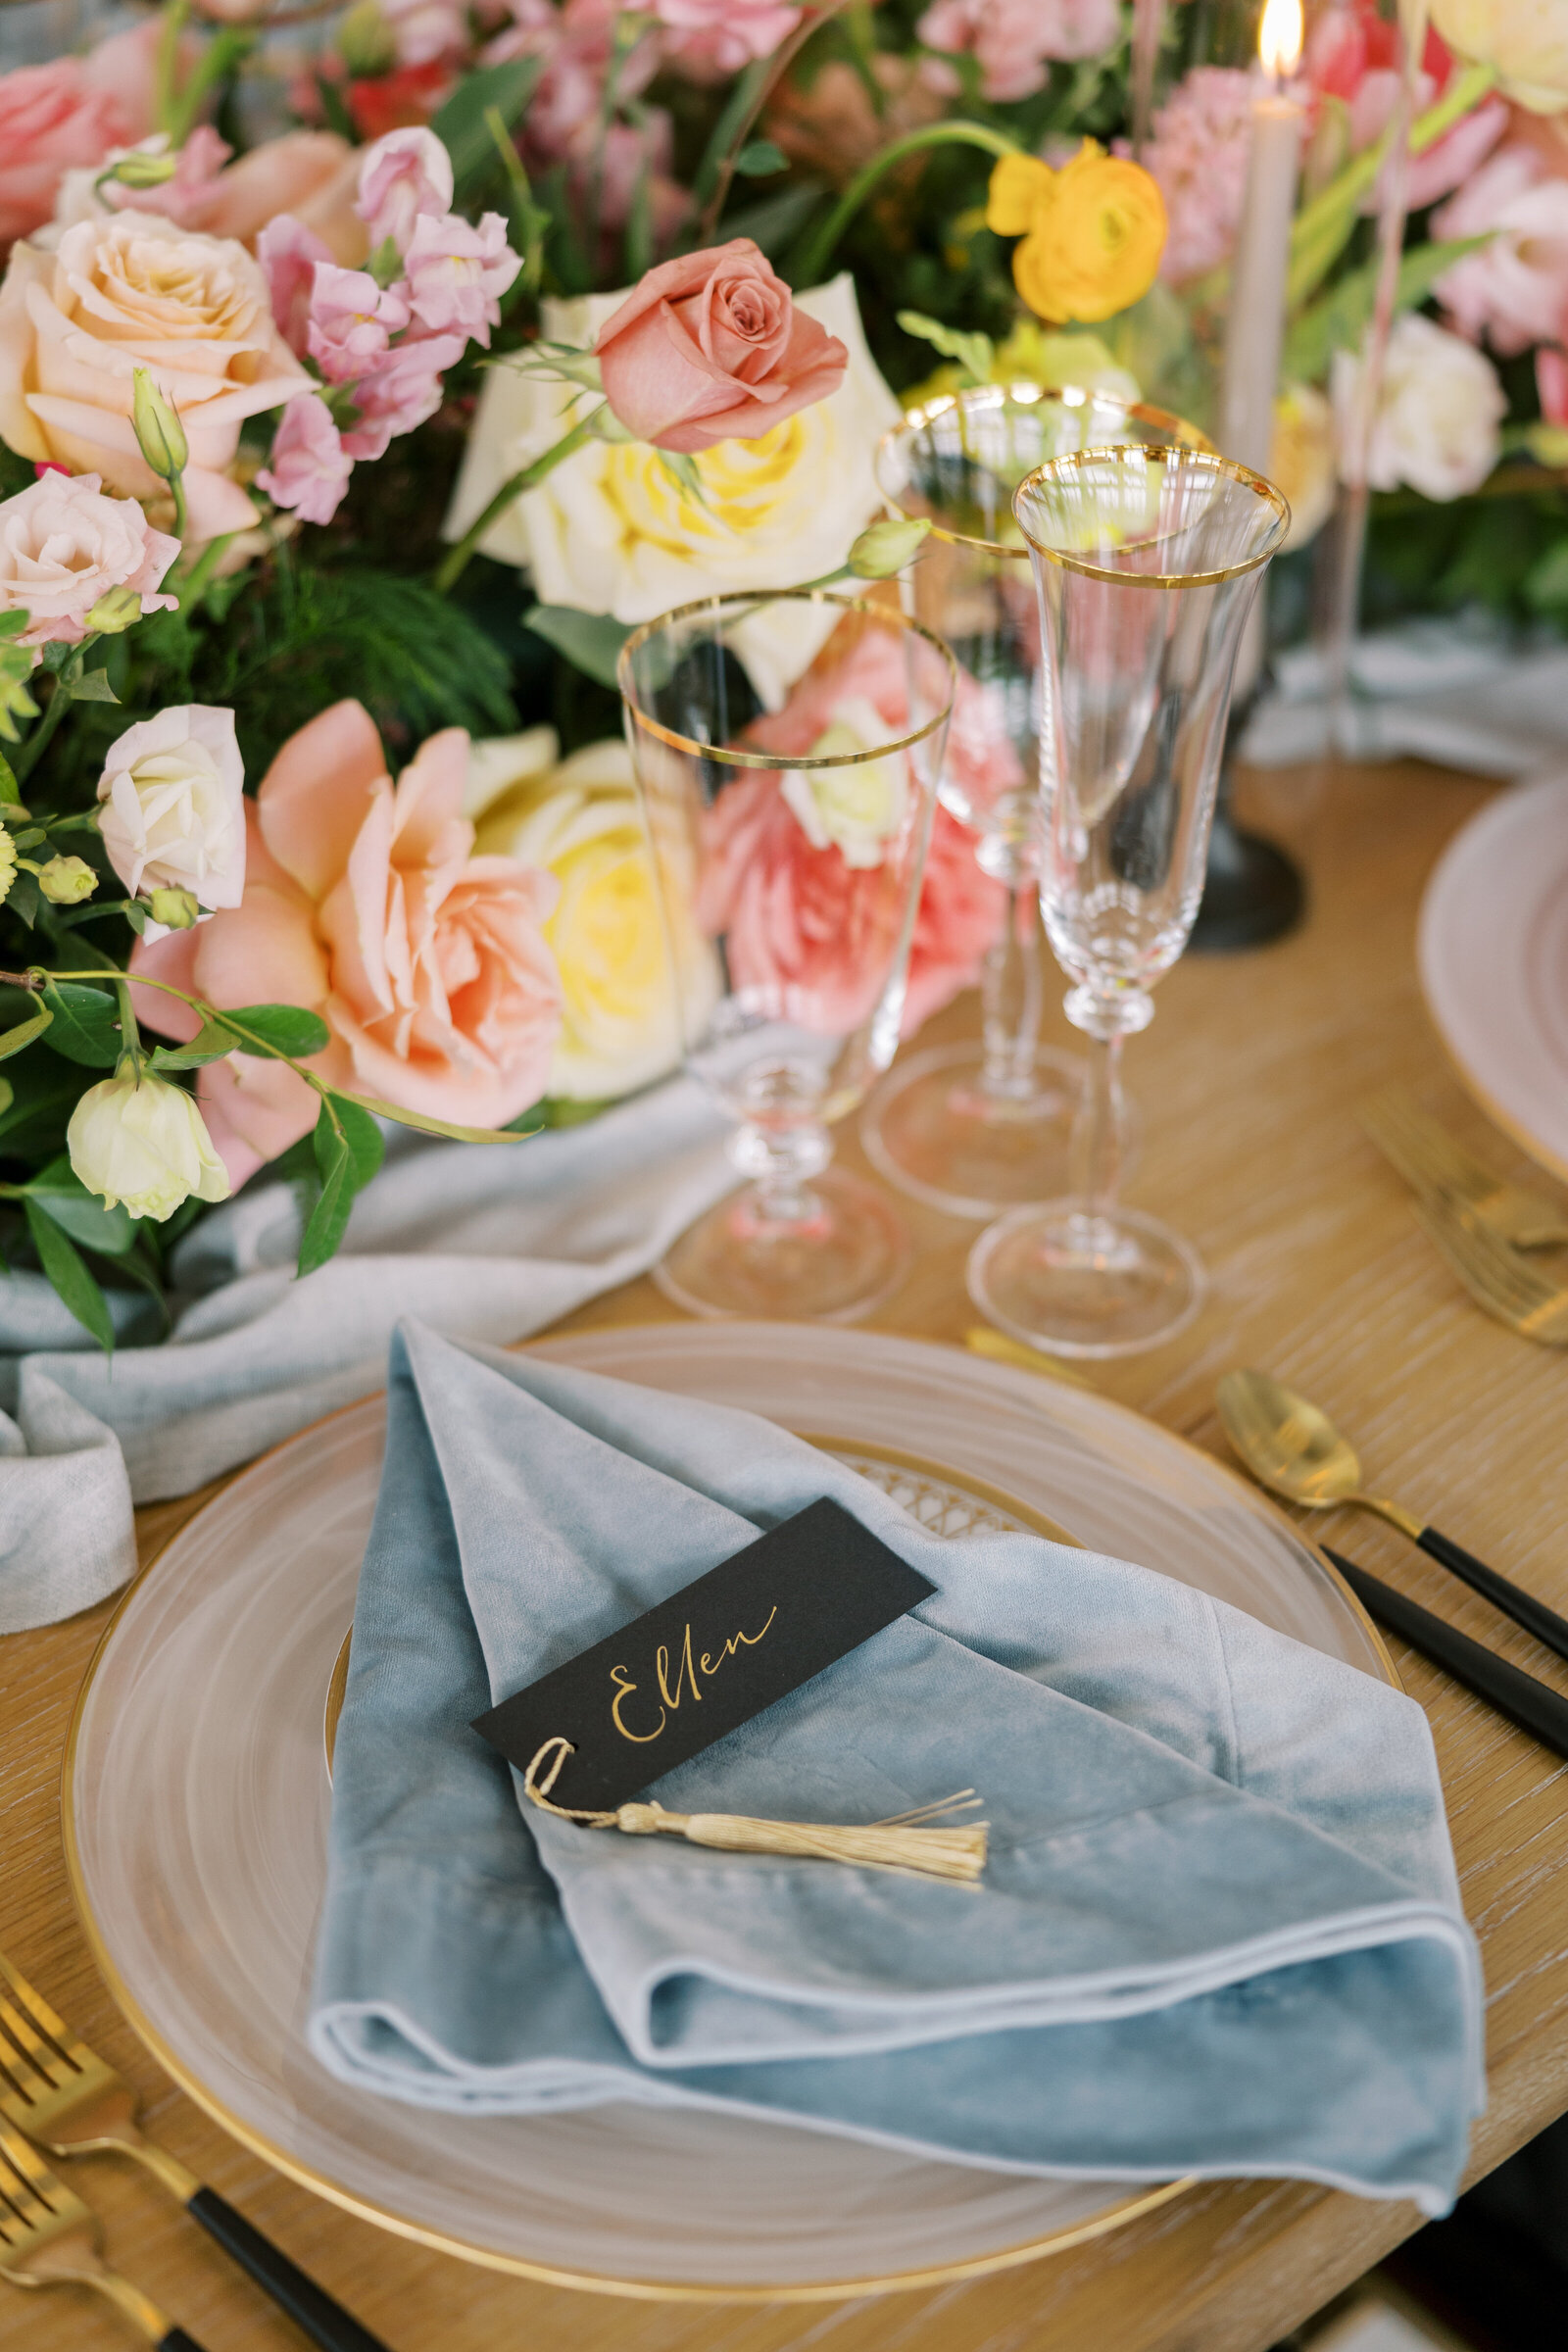 Table setting with personalized placecards